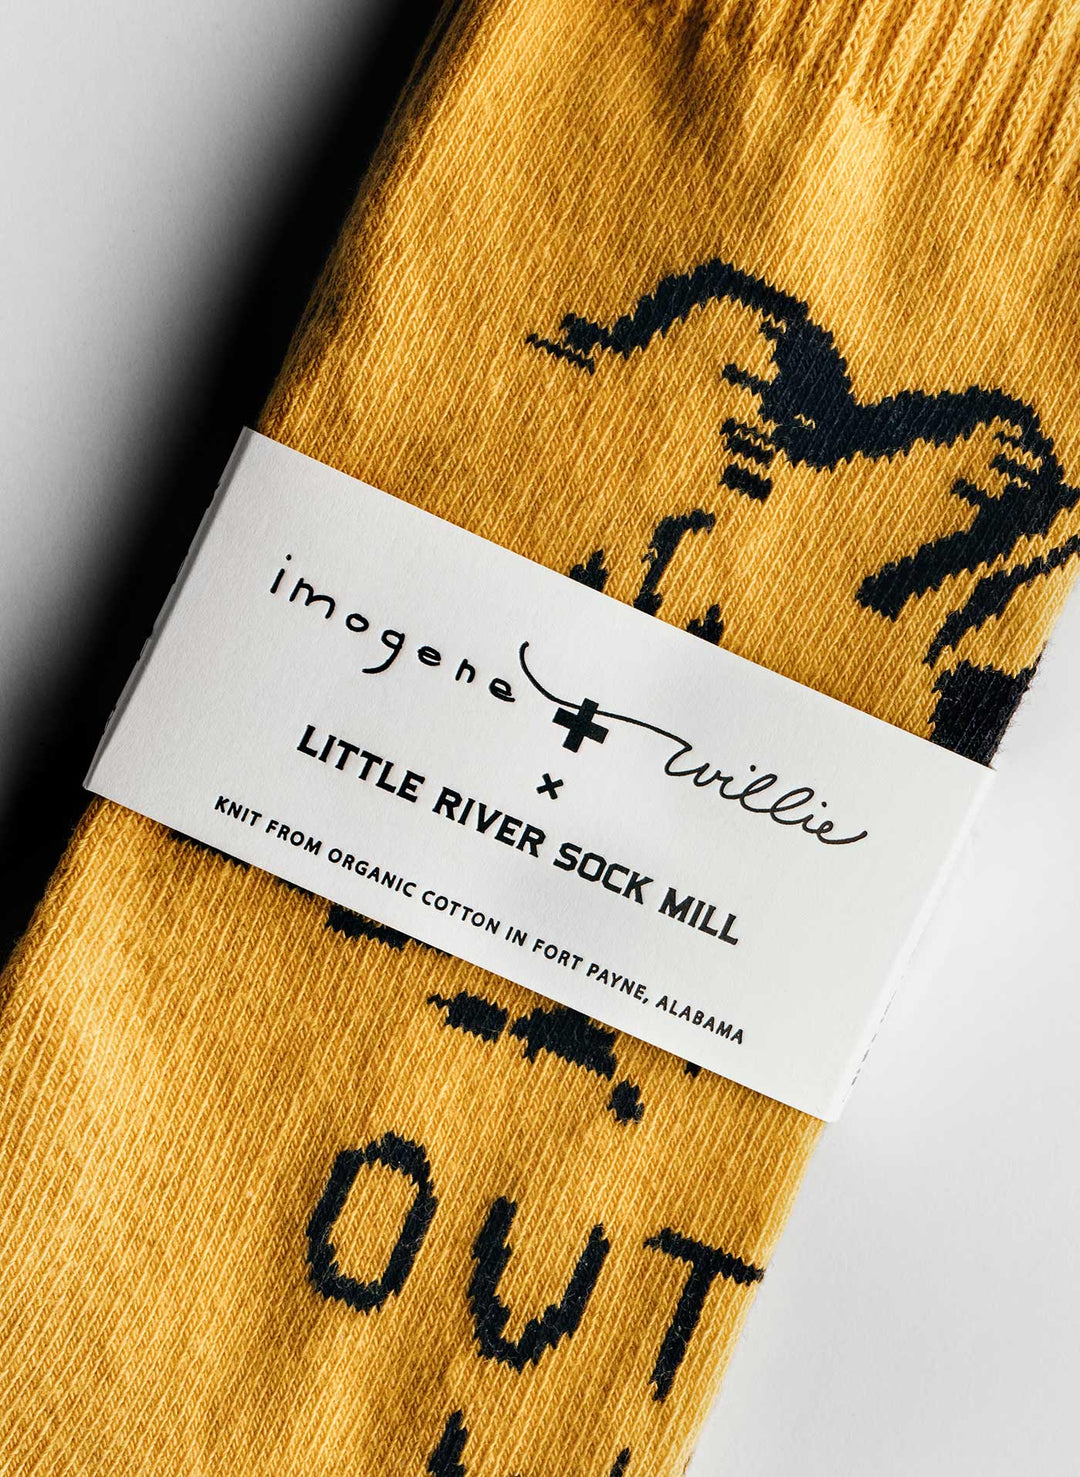 a yellow sock with black text on it